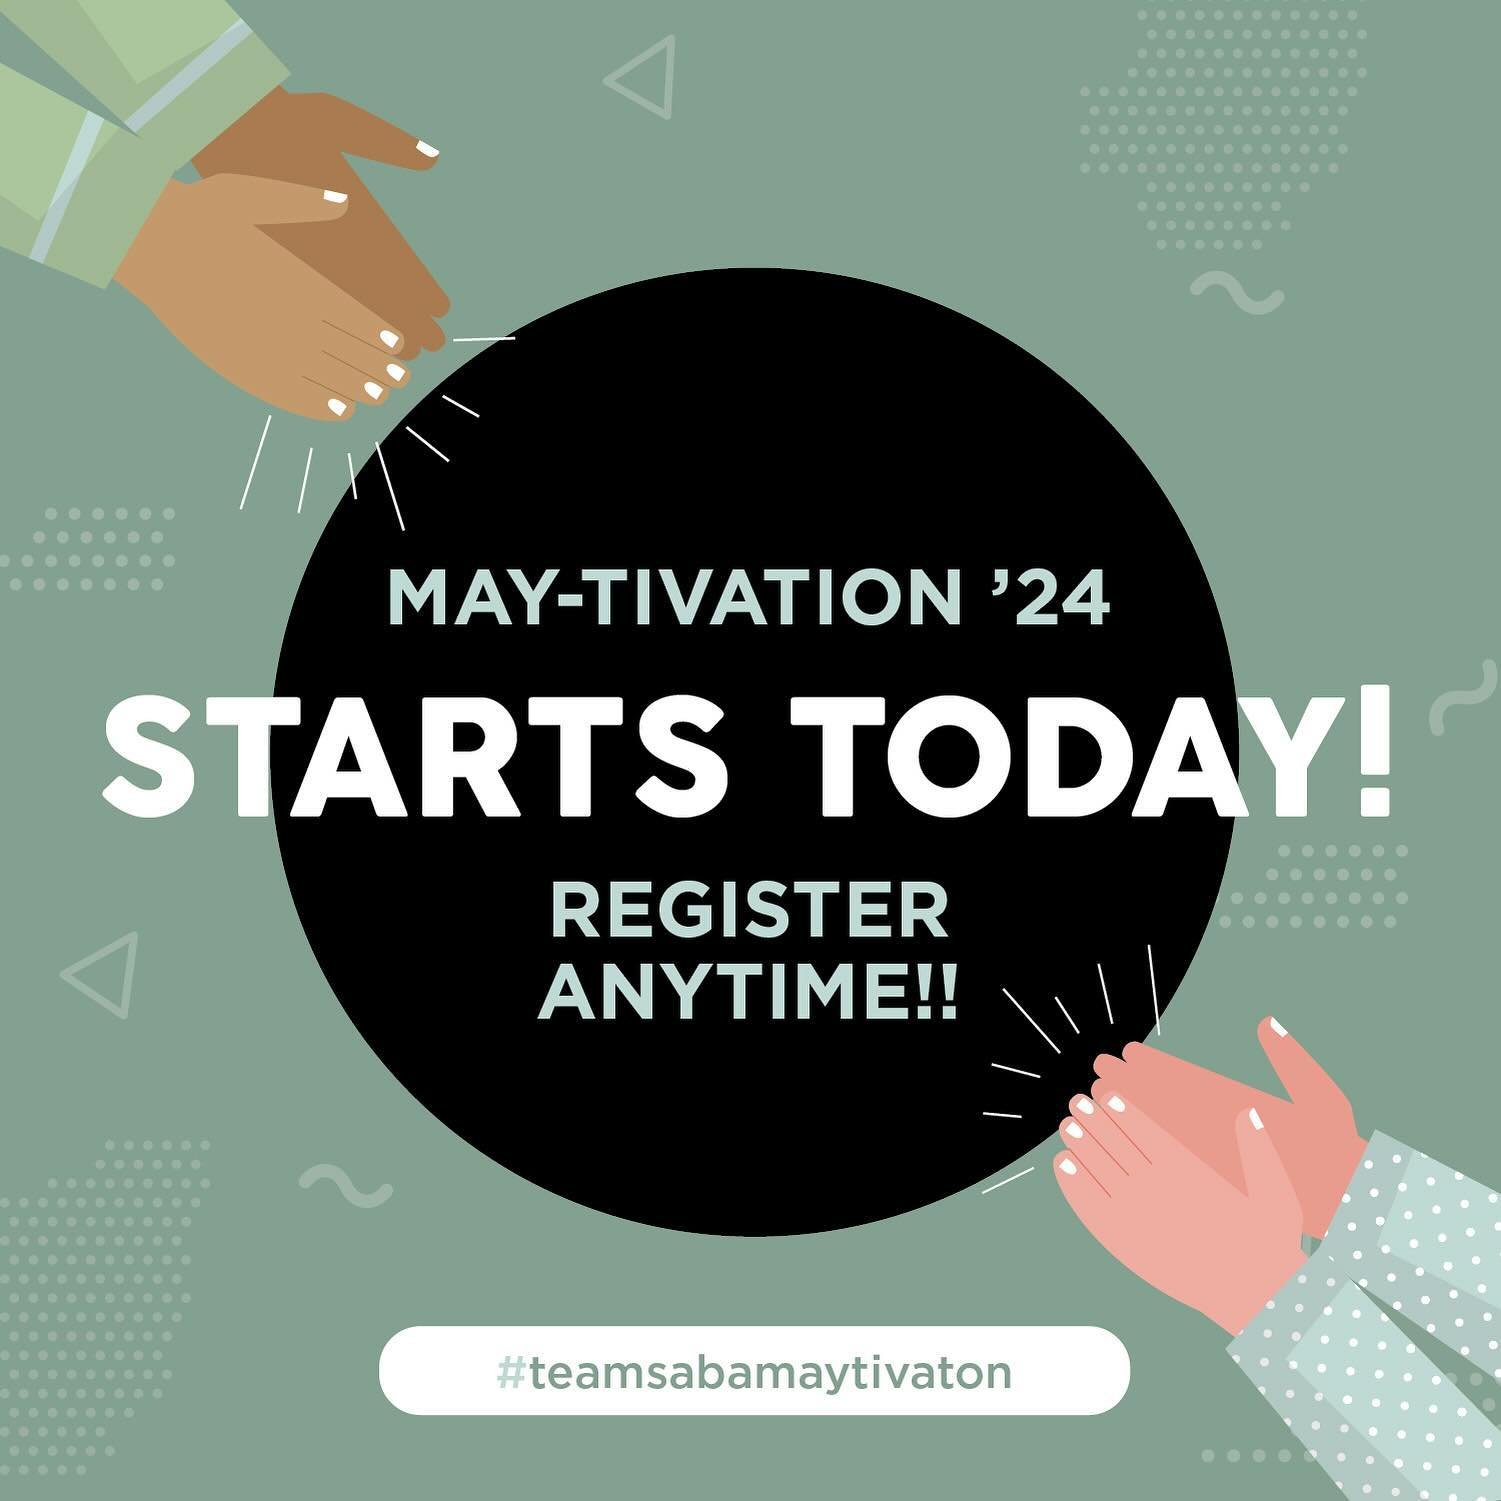 🟠 O P E N S  T O D A Y 🟠

🟠 REGISTER HERE &mdash; 
https://www.mycause.com.au/events/may-tivation

👣 ⚫️ M A Y - t i v a t i o n ⚫️ 👣  2 0 2 4 

✔️ DO A MARATHON IN MAY - Your way 👏🏻

➖ 42kms : Use STRAVA (free) and watch your progress. 
➖ Walk